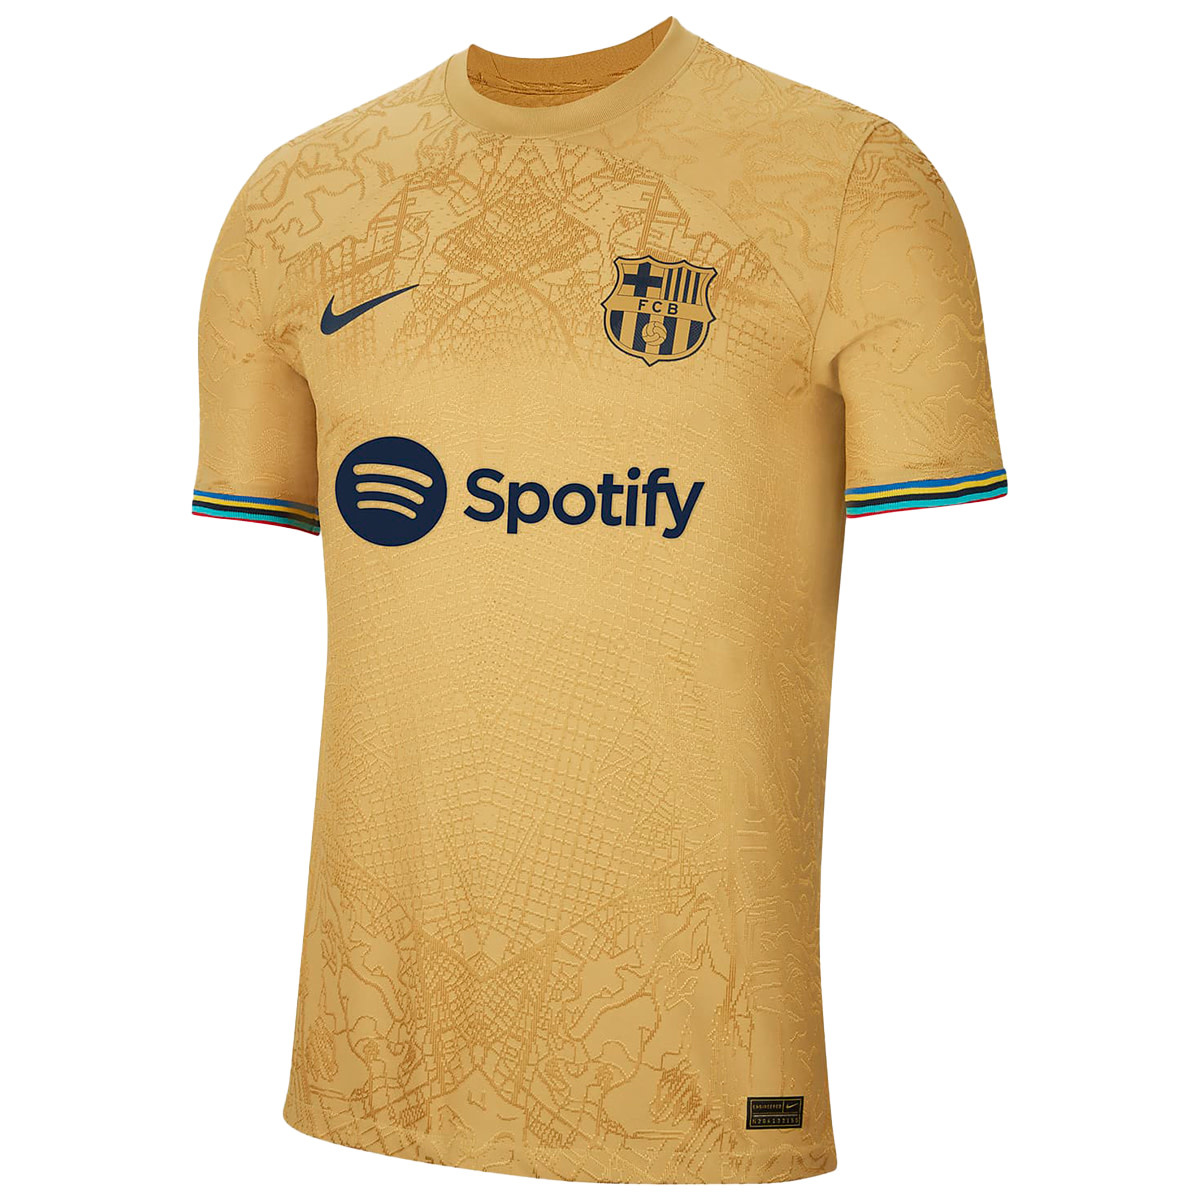 fc barcelona black and gold jersey